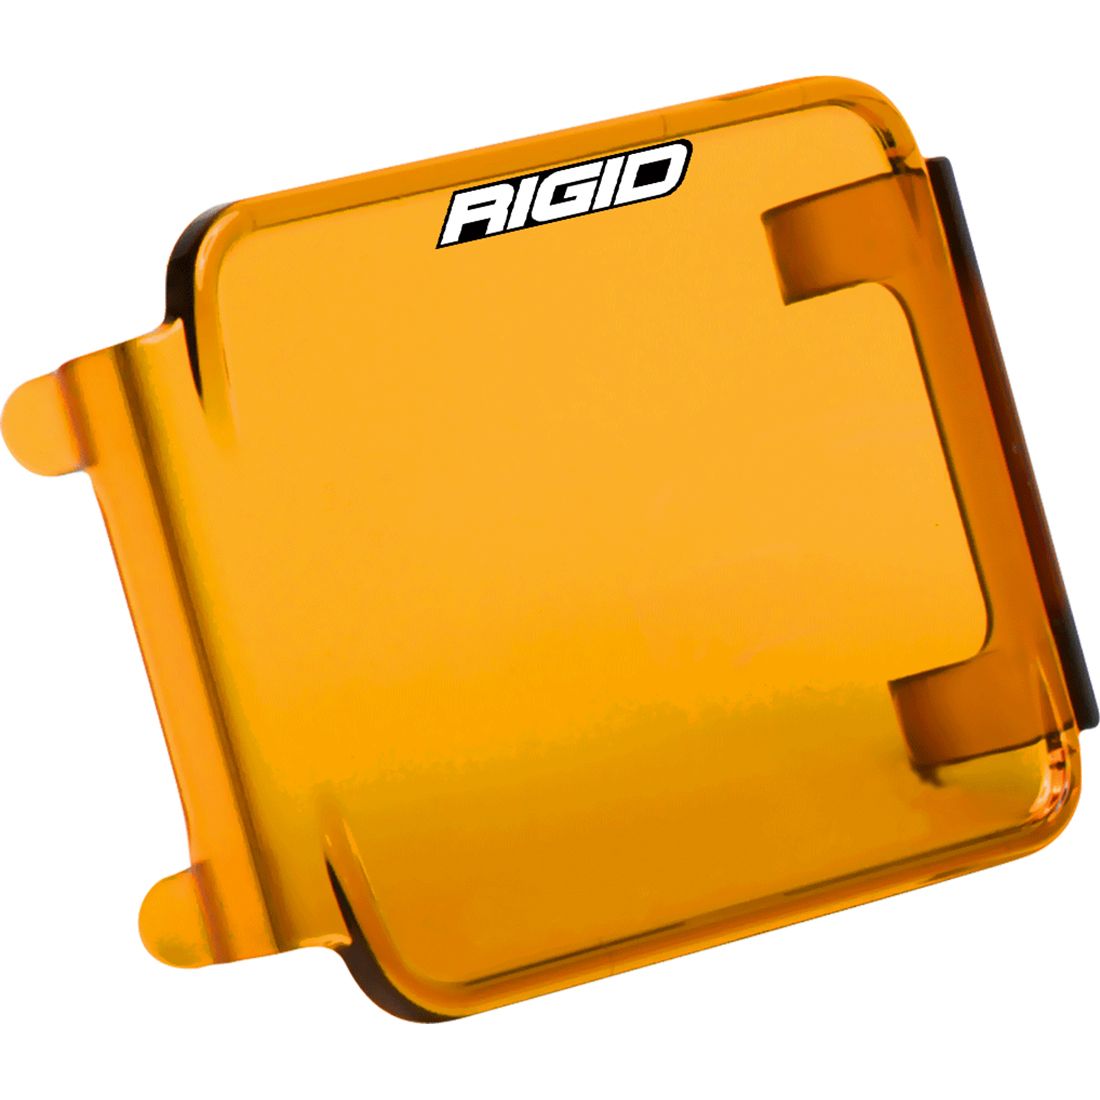 Rigid D-Series / Radiance Covers (Sold in singles)